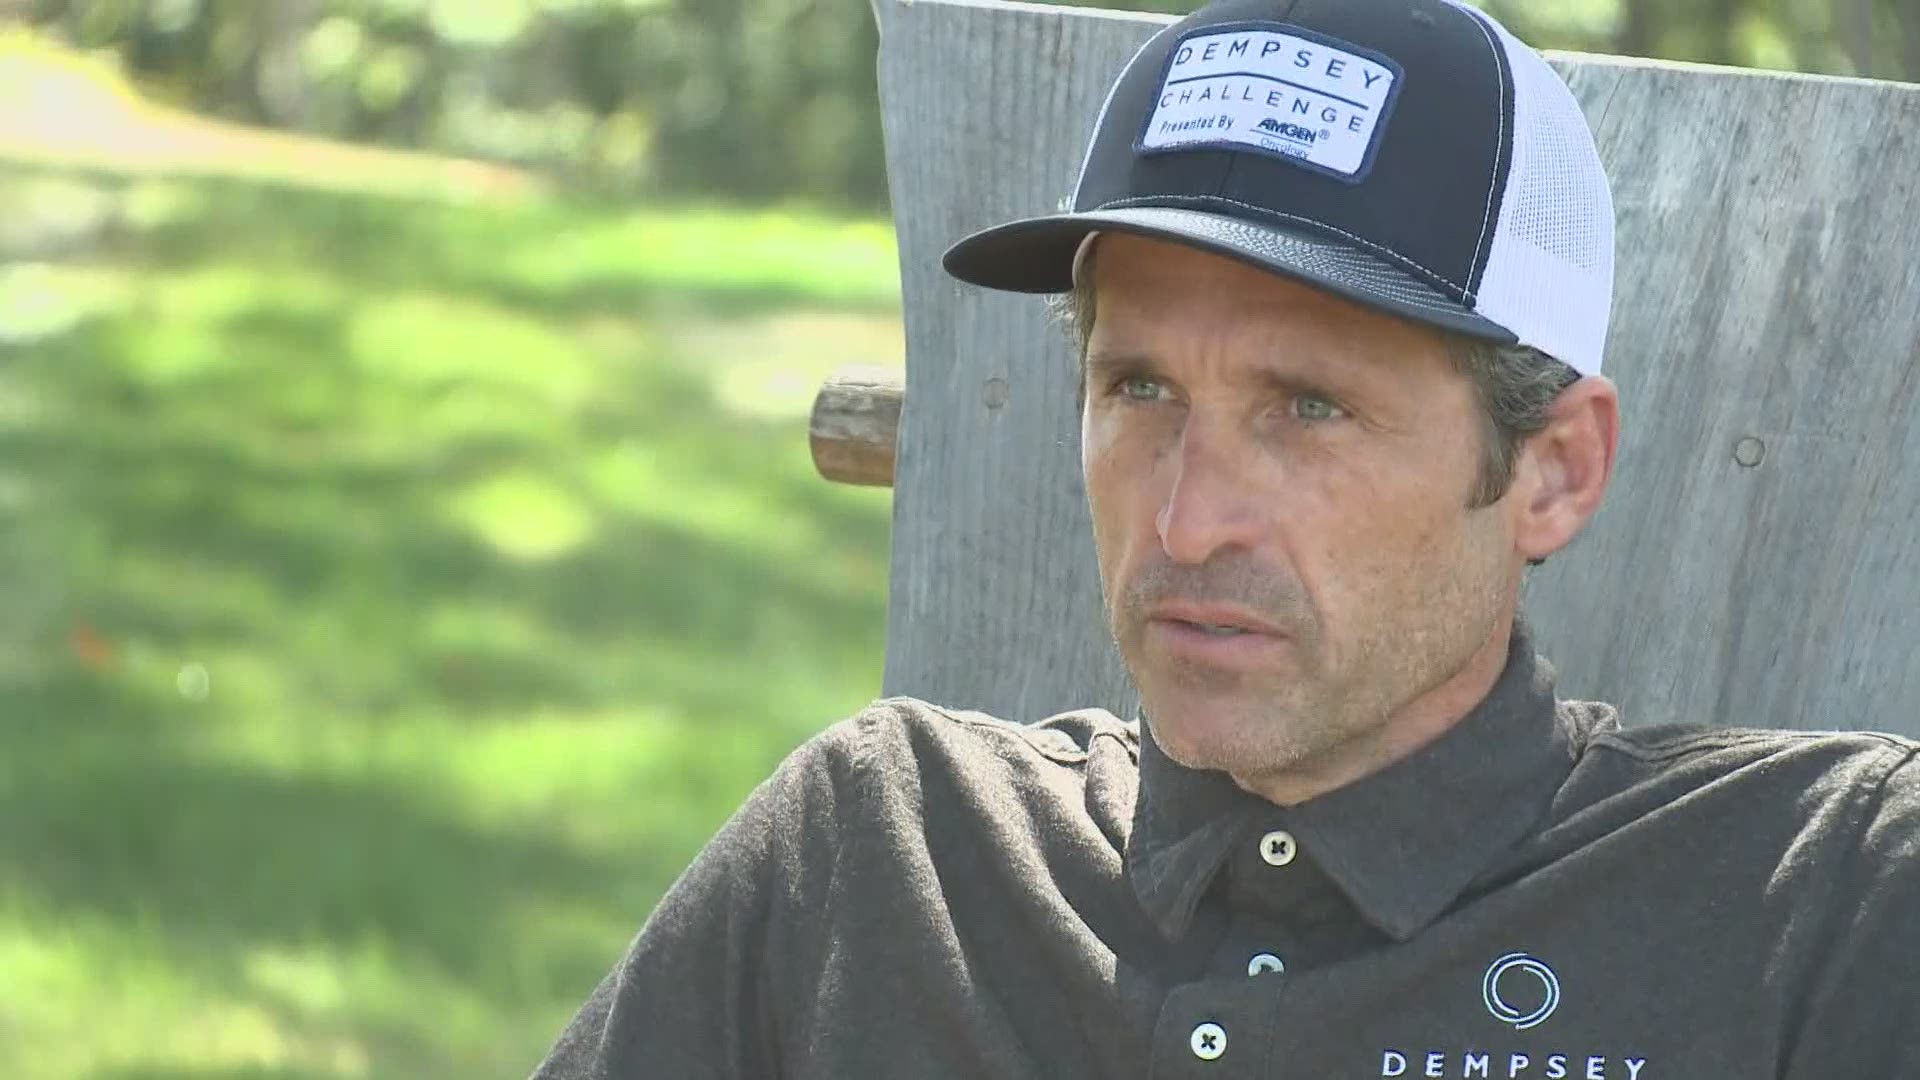 Patrick Dempsey gears up for the Dempsey Challenge